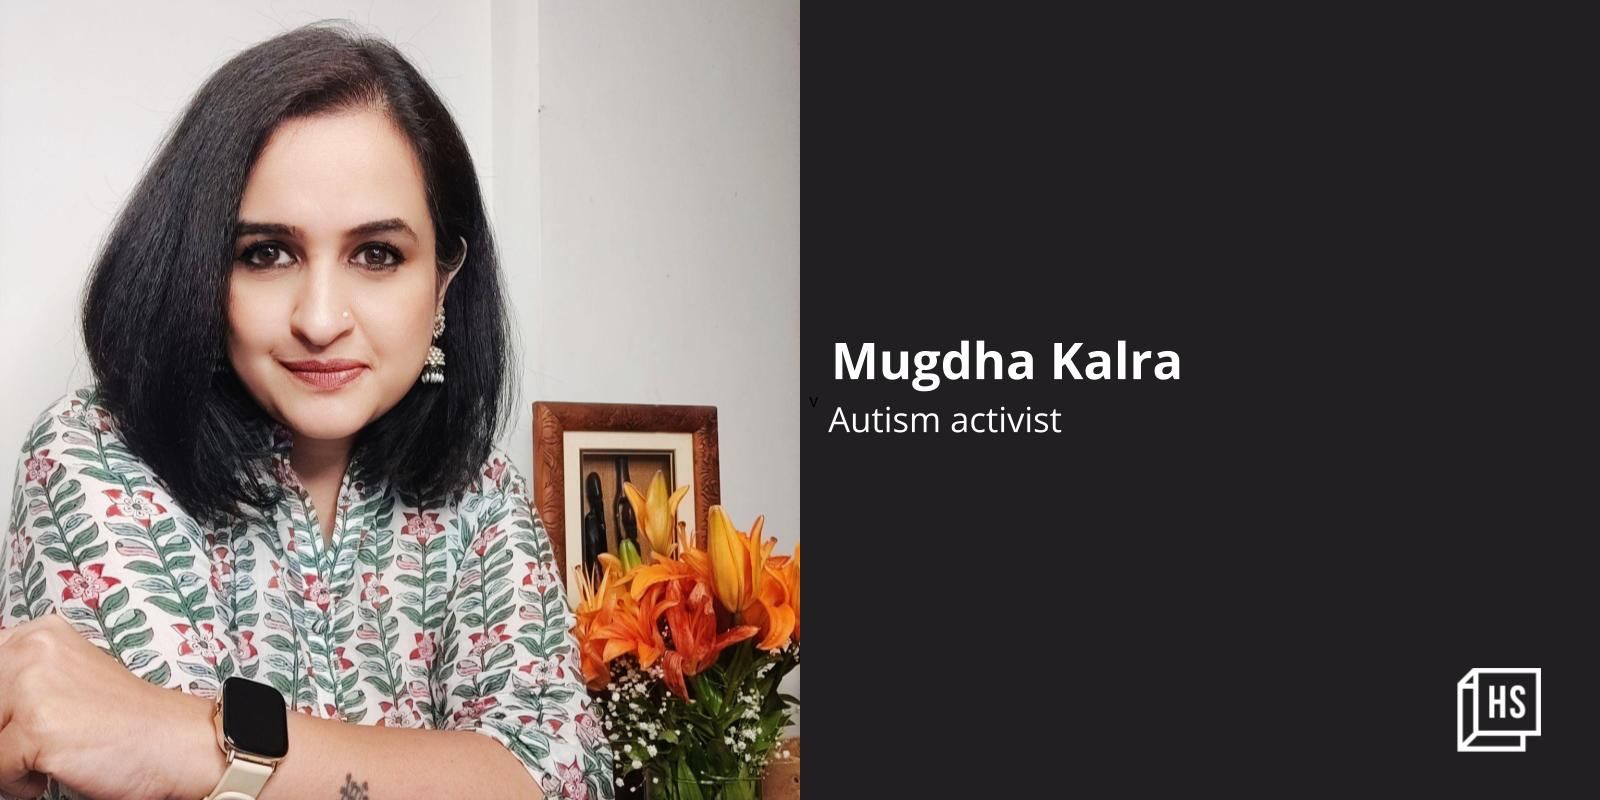 Meet Mugdha Kalra, an autism activist who is championing the cause of caregivers 